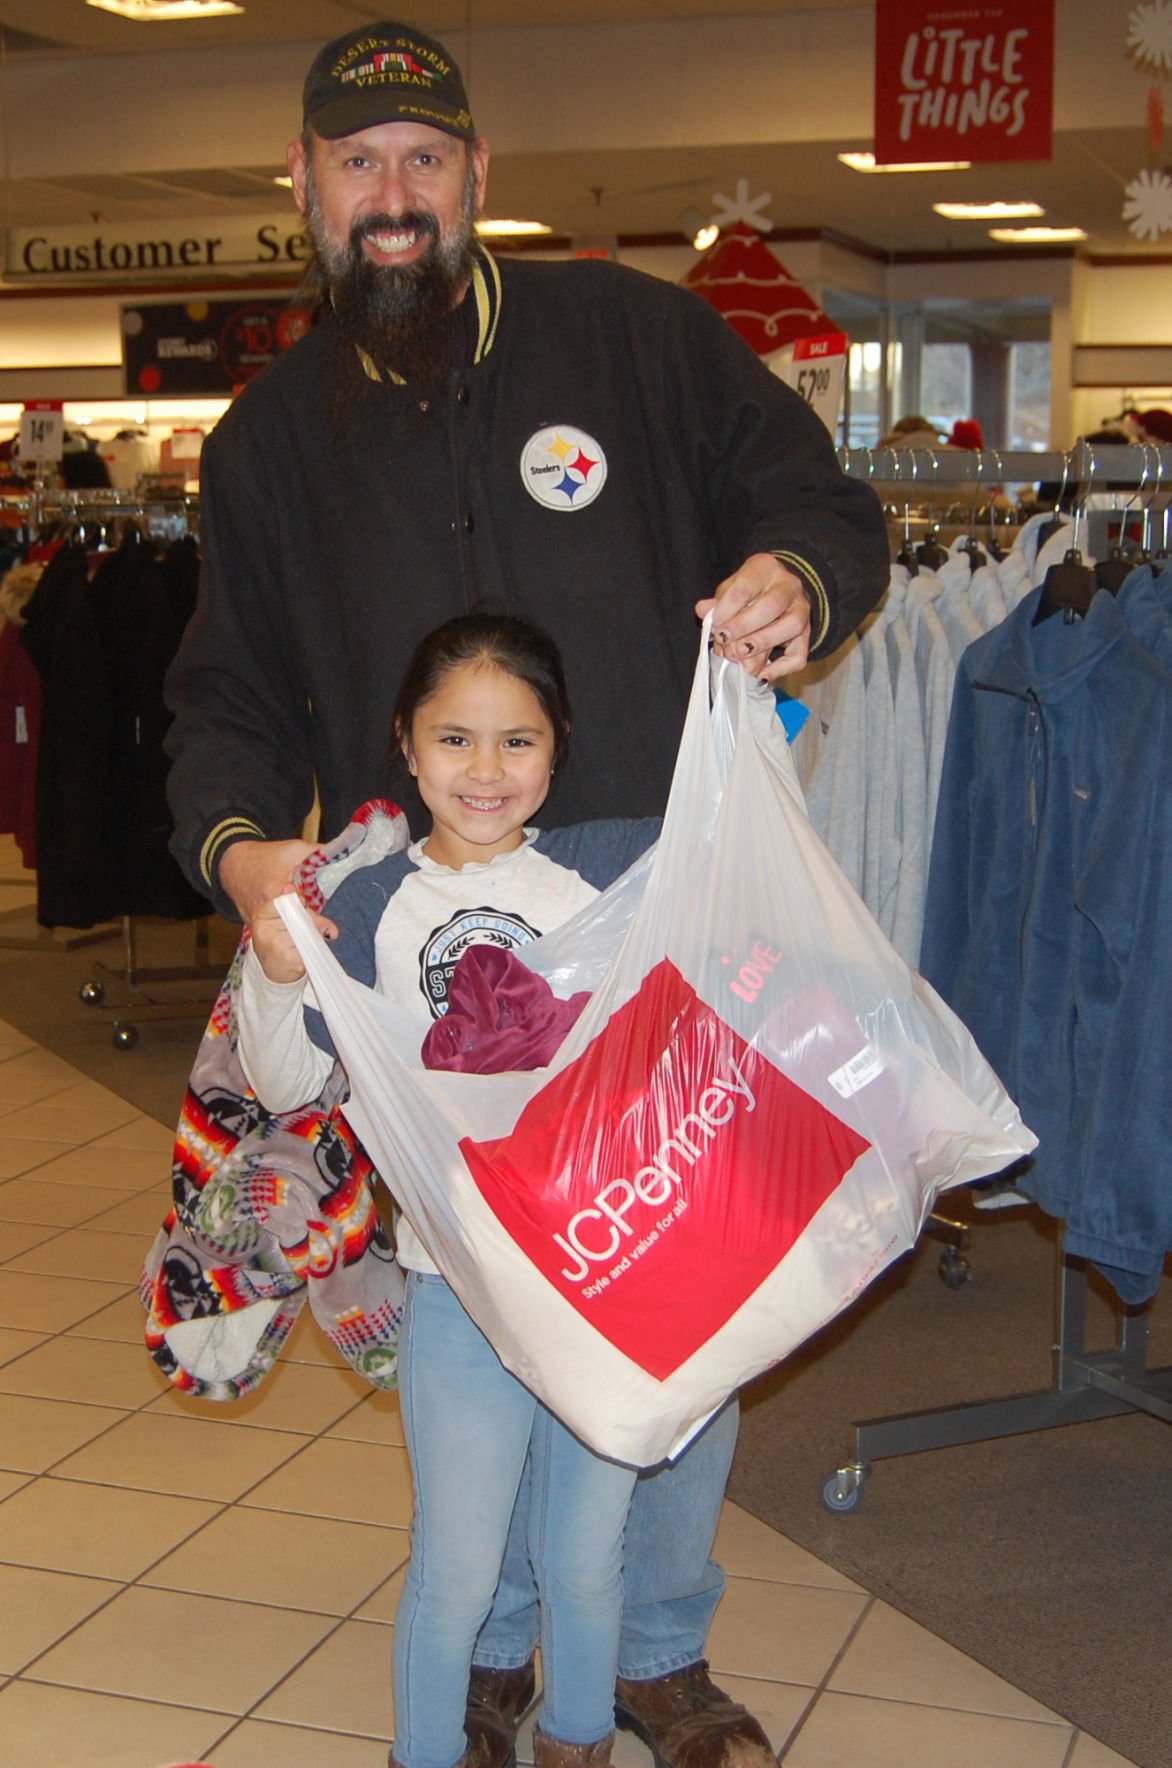 WM Clothe-A-Child helps 42 children with shopping